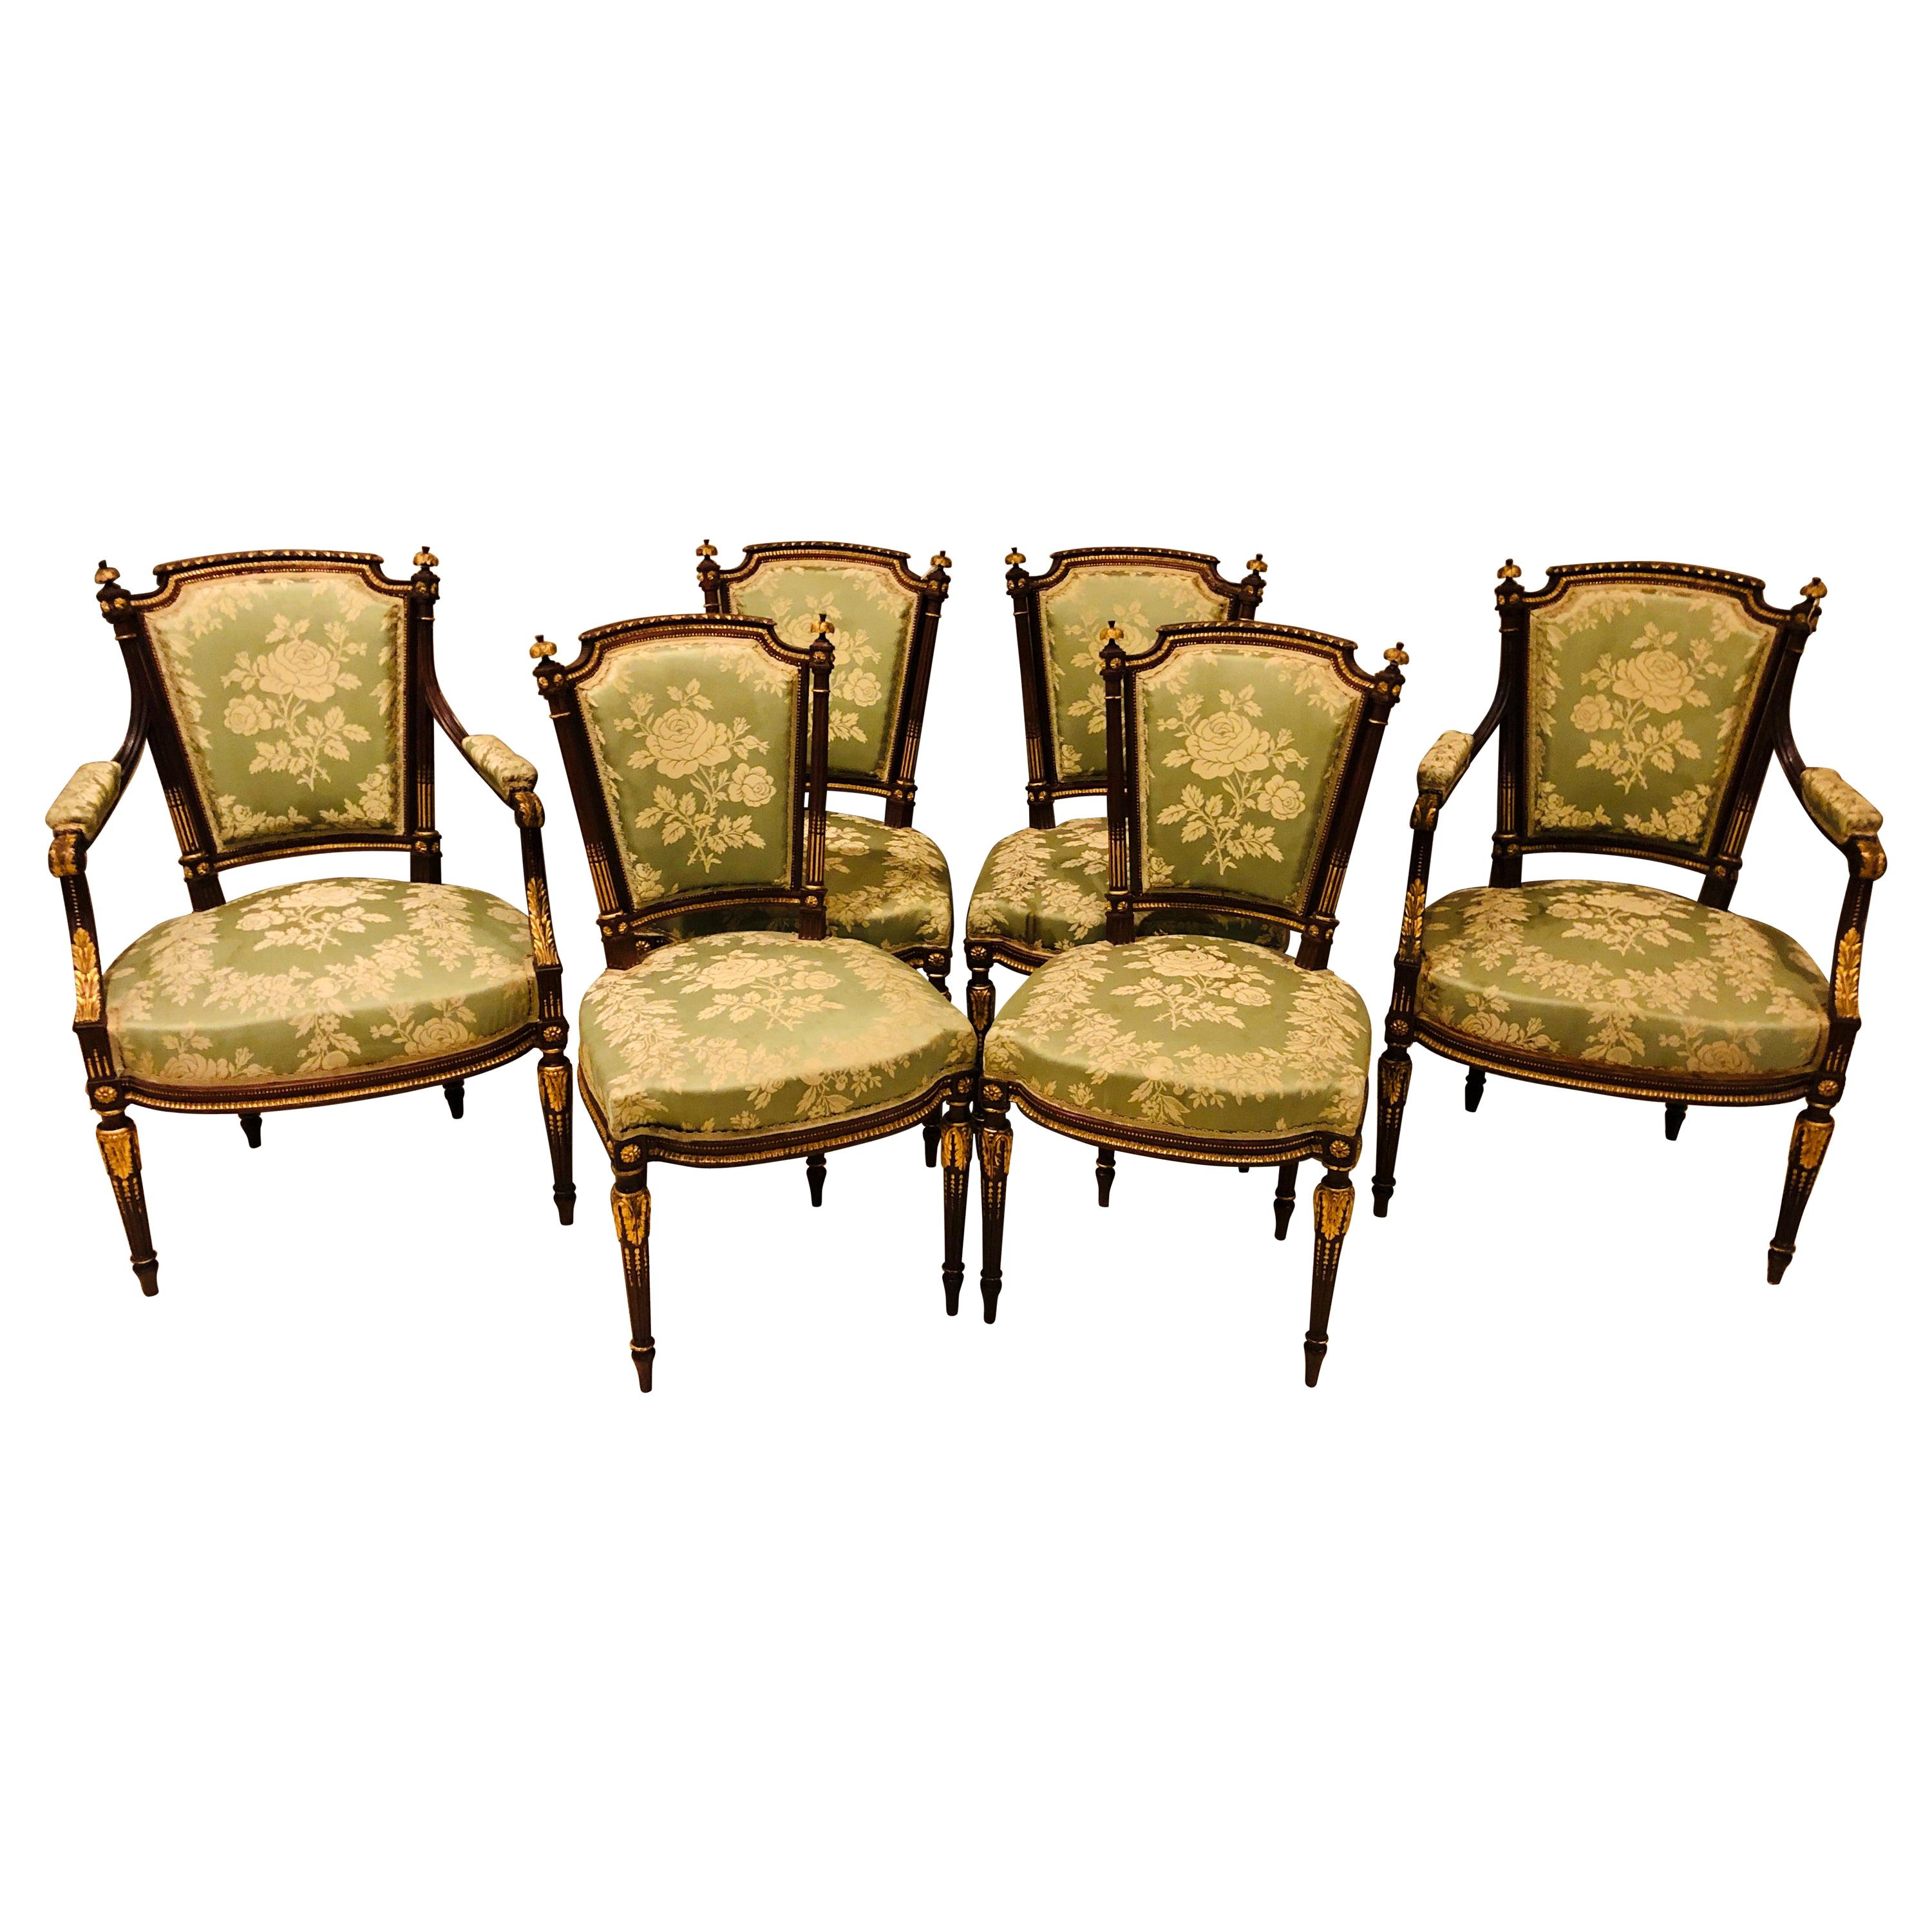 Louis XVI Style Six-Piece Parlor Suite Pair of Arm and Four Side Chairs